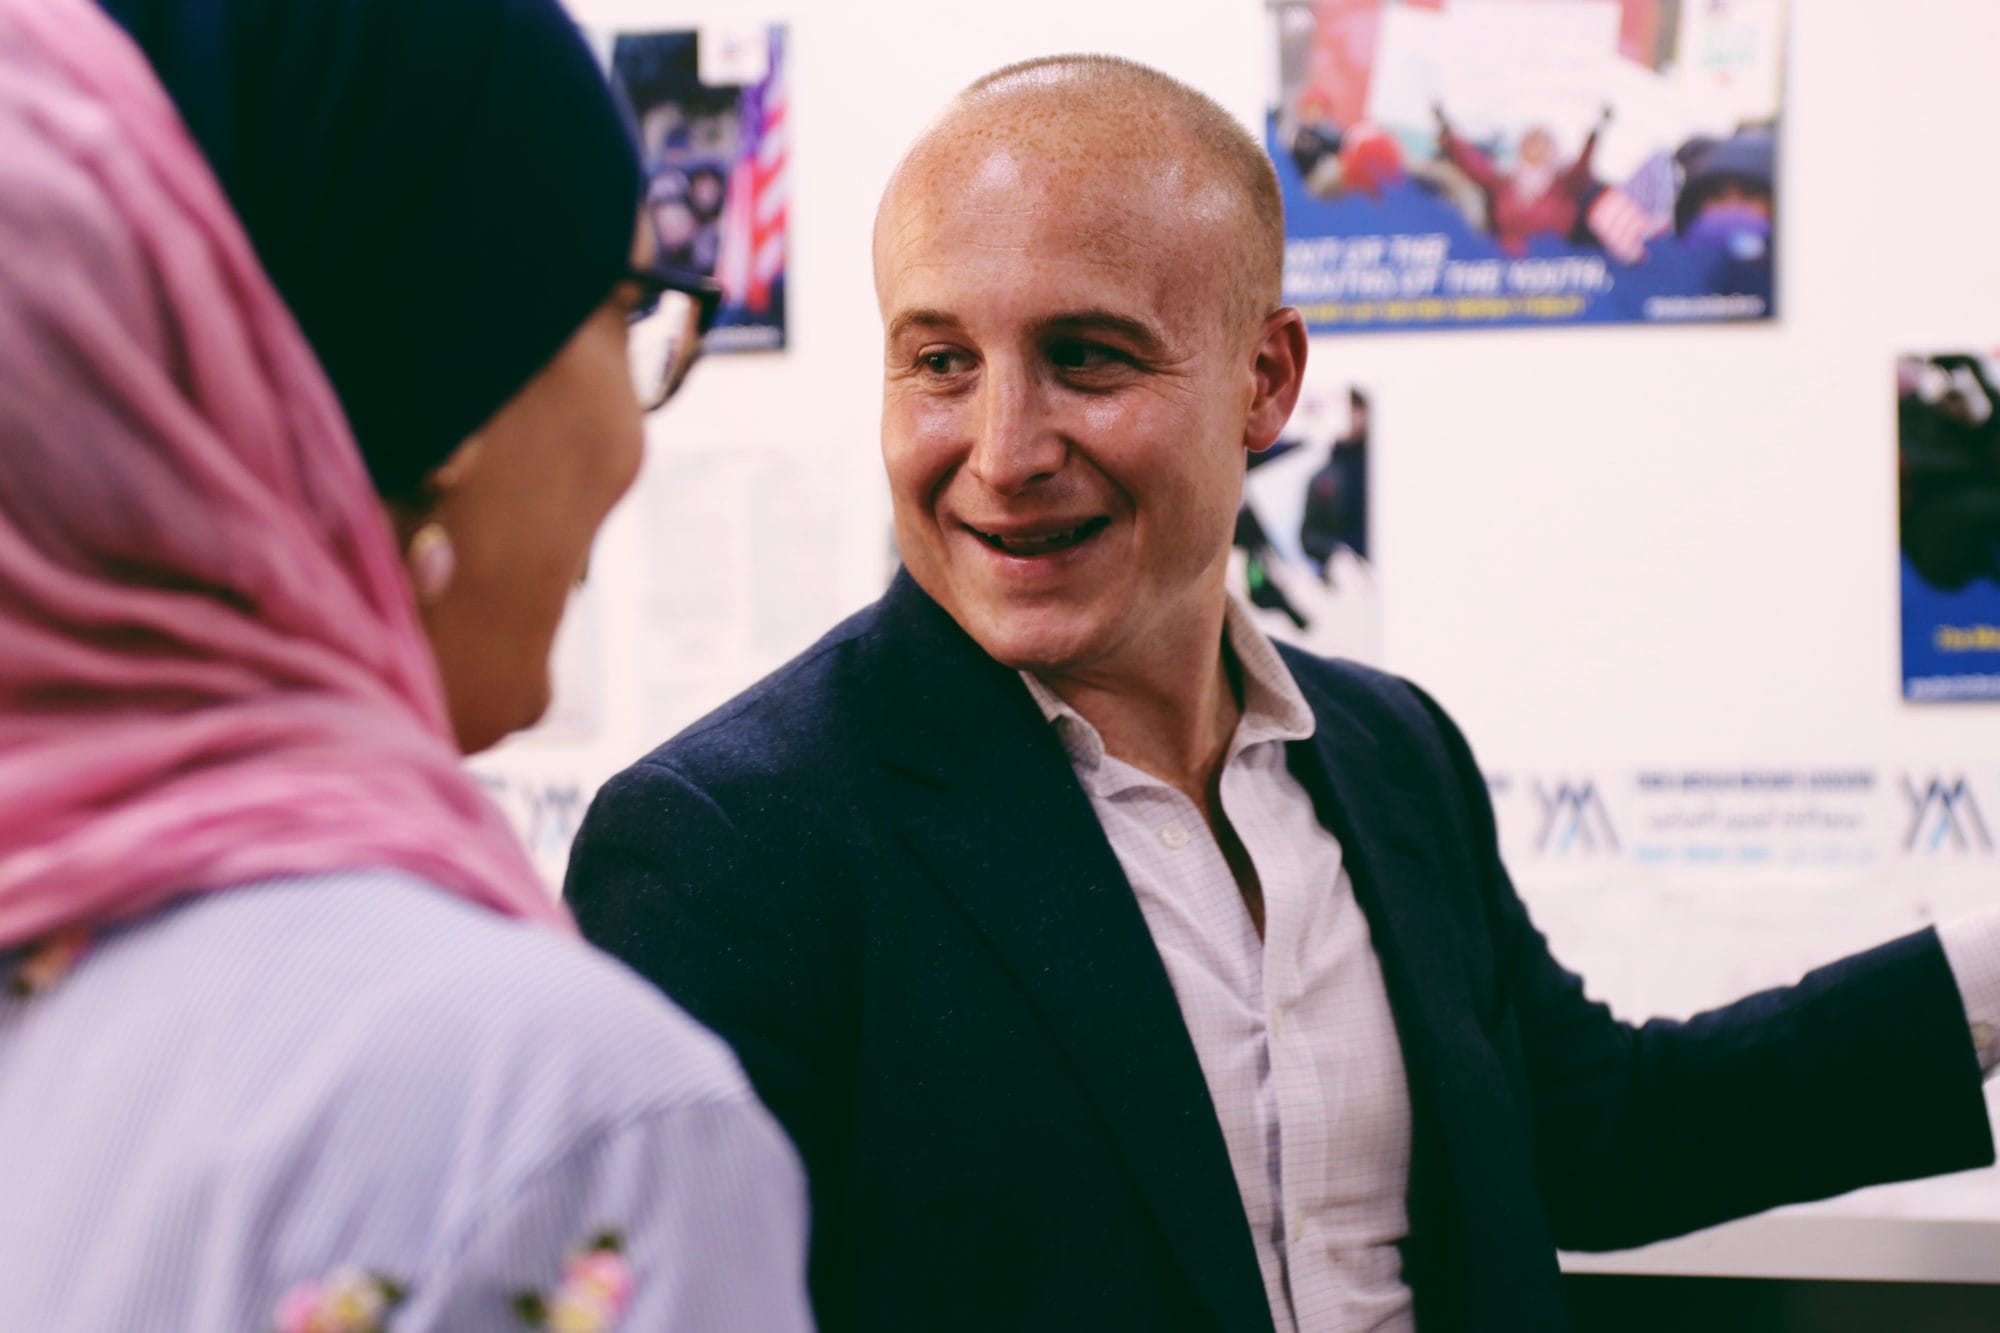 Rep. Max Rose Deployed To The National Guard To Assist In Coronavirus Relief Efforts